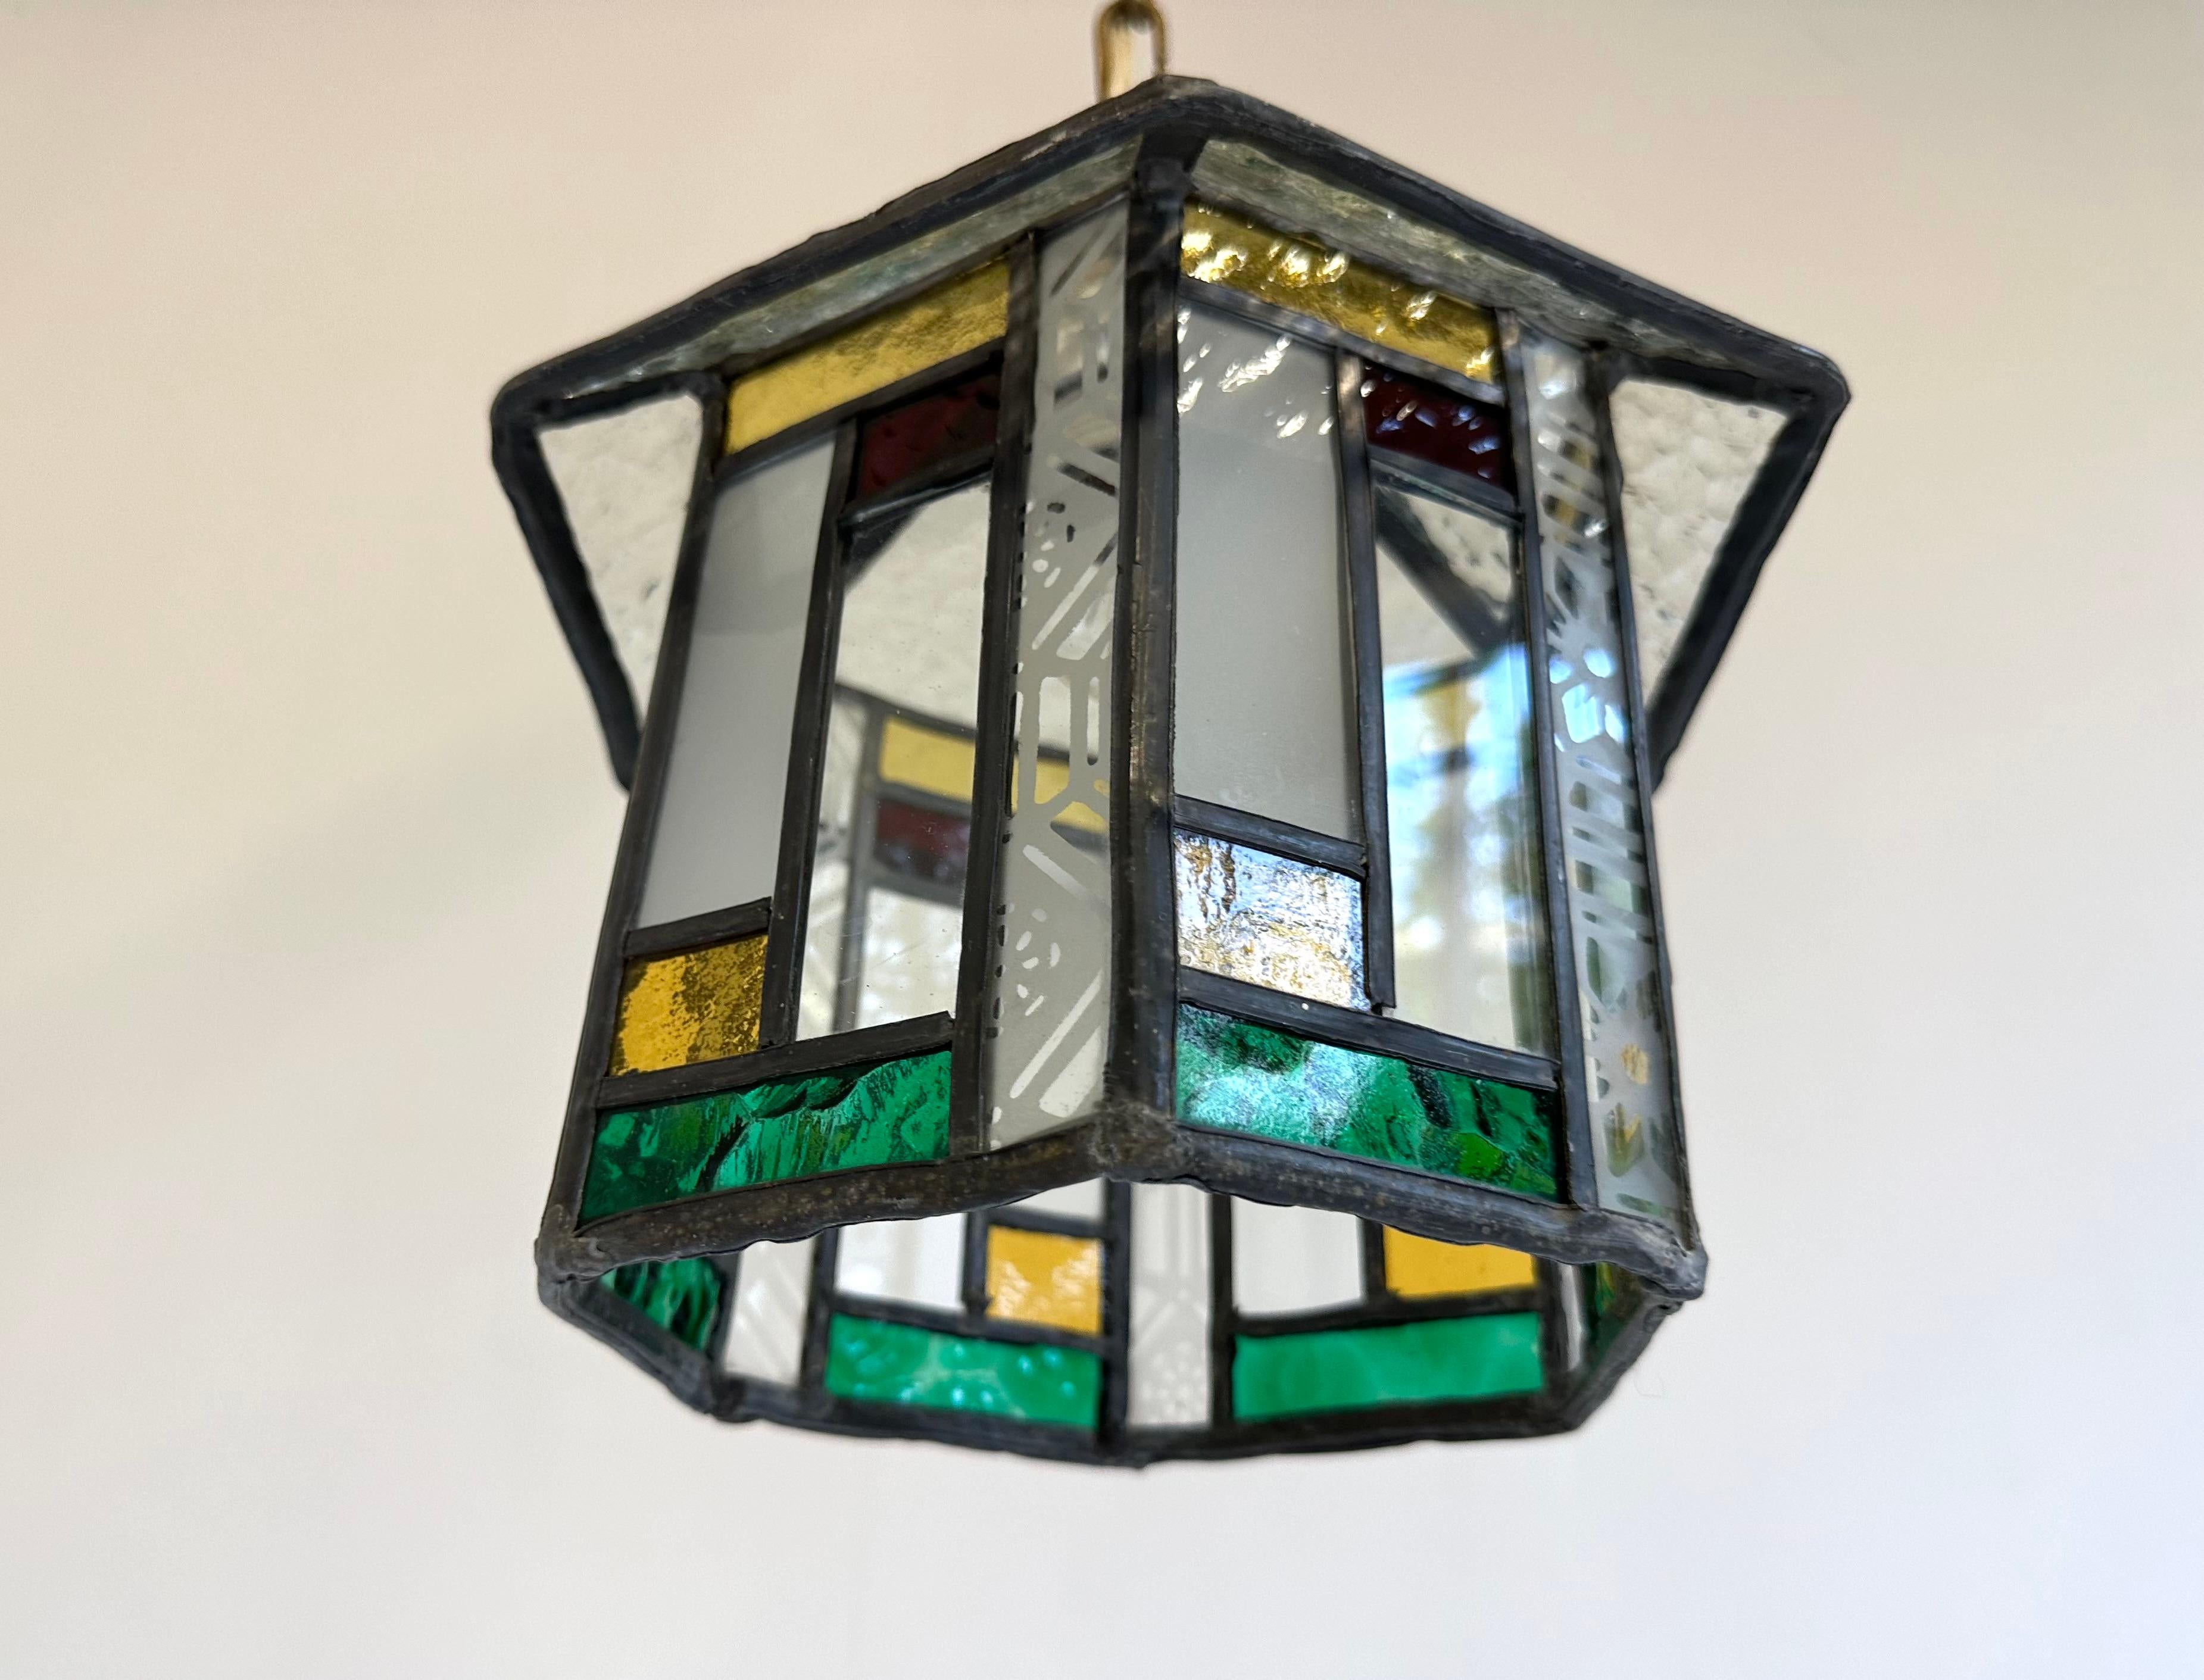 Introducing the strikingly beautiful 1920 Stained Glass Hallway Lantern. This Dutch Art Deco style lantern is the perfect addition to any home that appreciates the beauty of handcrafted glass. With brilliant jewel-toned hues and intricate geometric